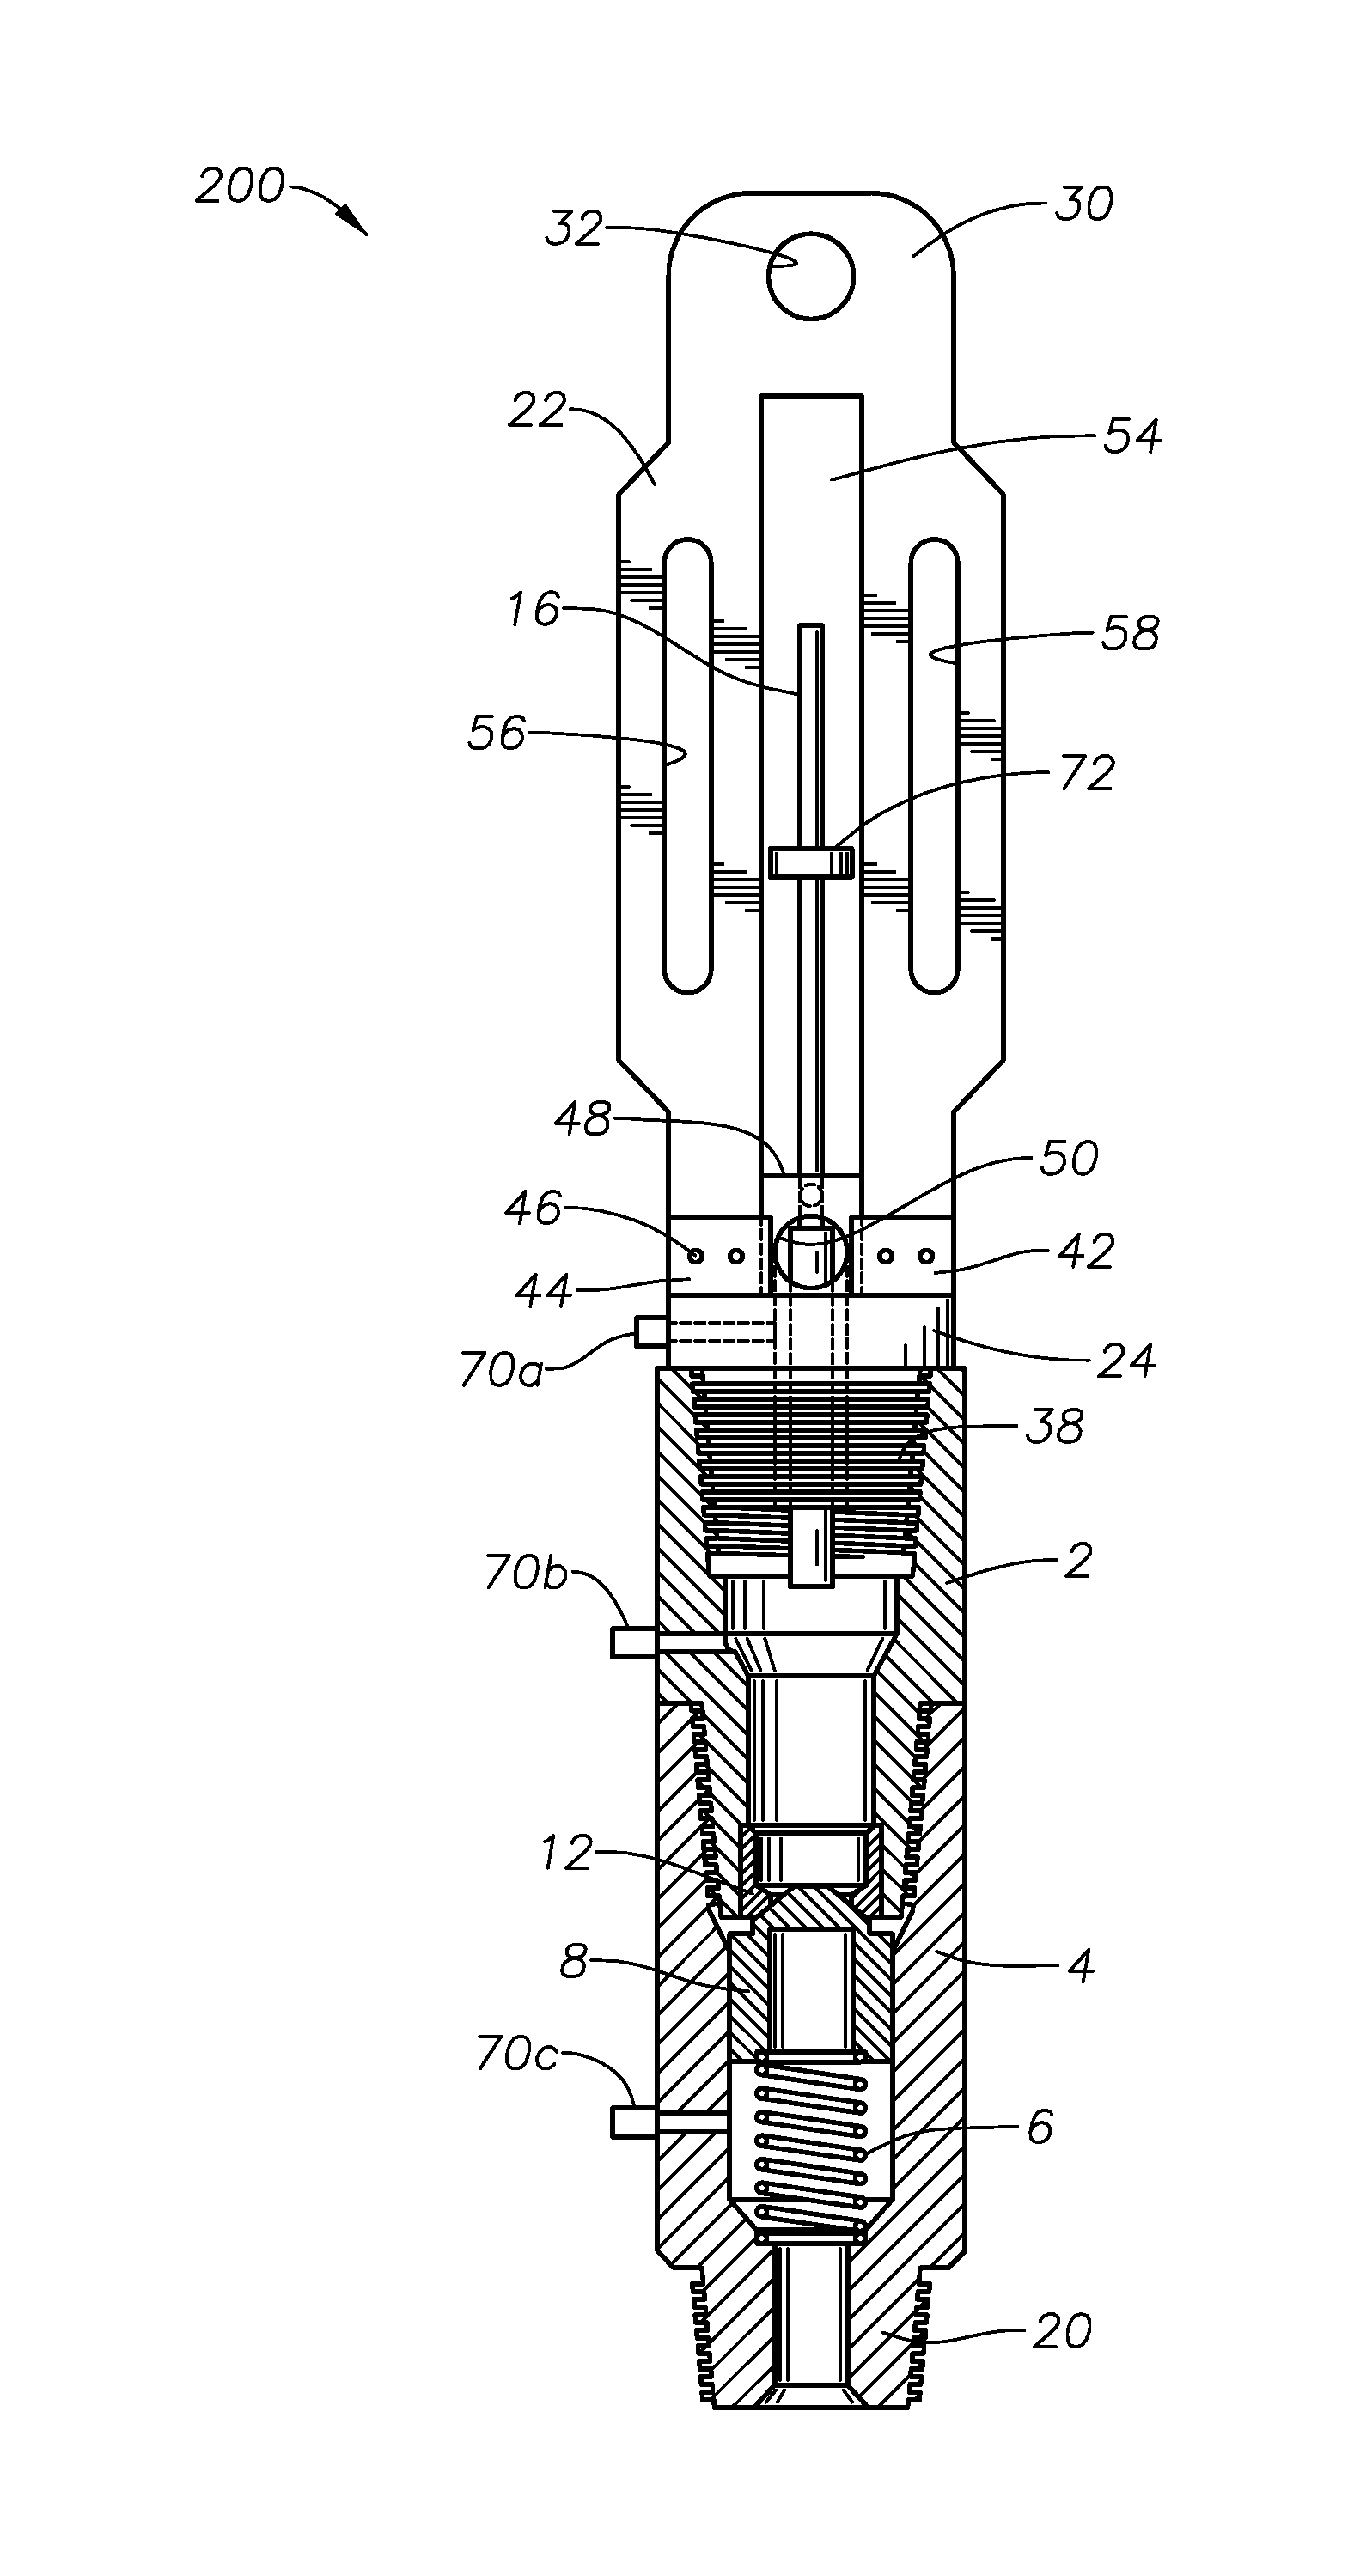 Release tool for a drill string inside blowout preventer